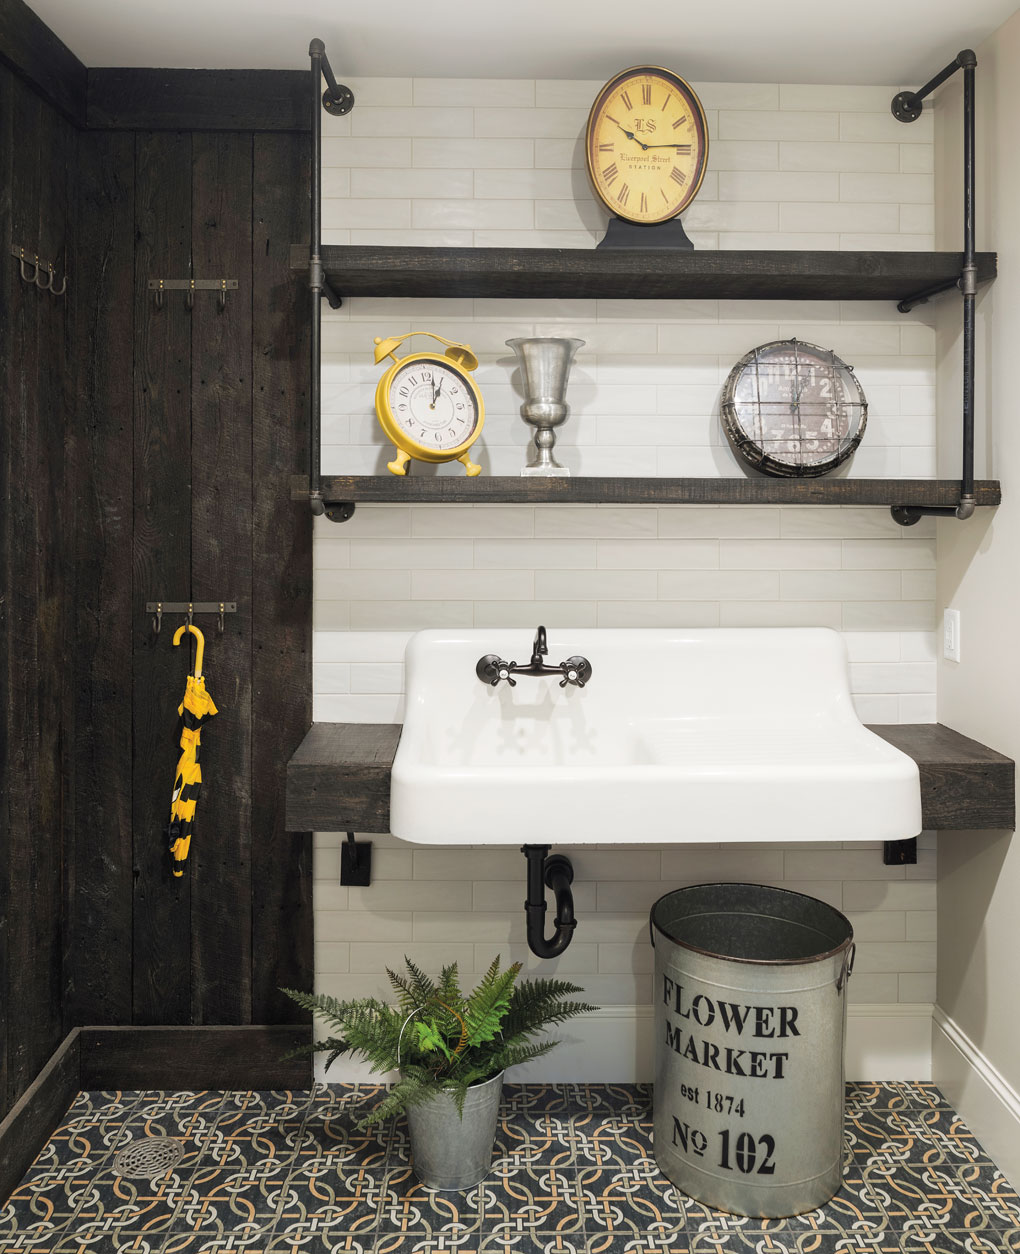 A mudroom with three clocks adorning the shelves above a large sink. An umbrella hangs on a nearby wall.